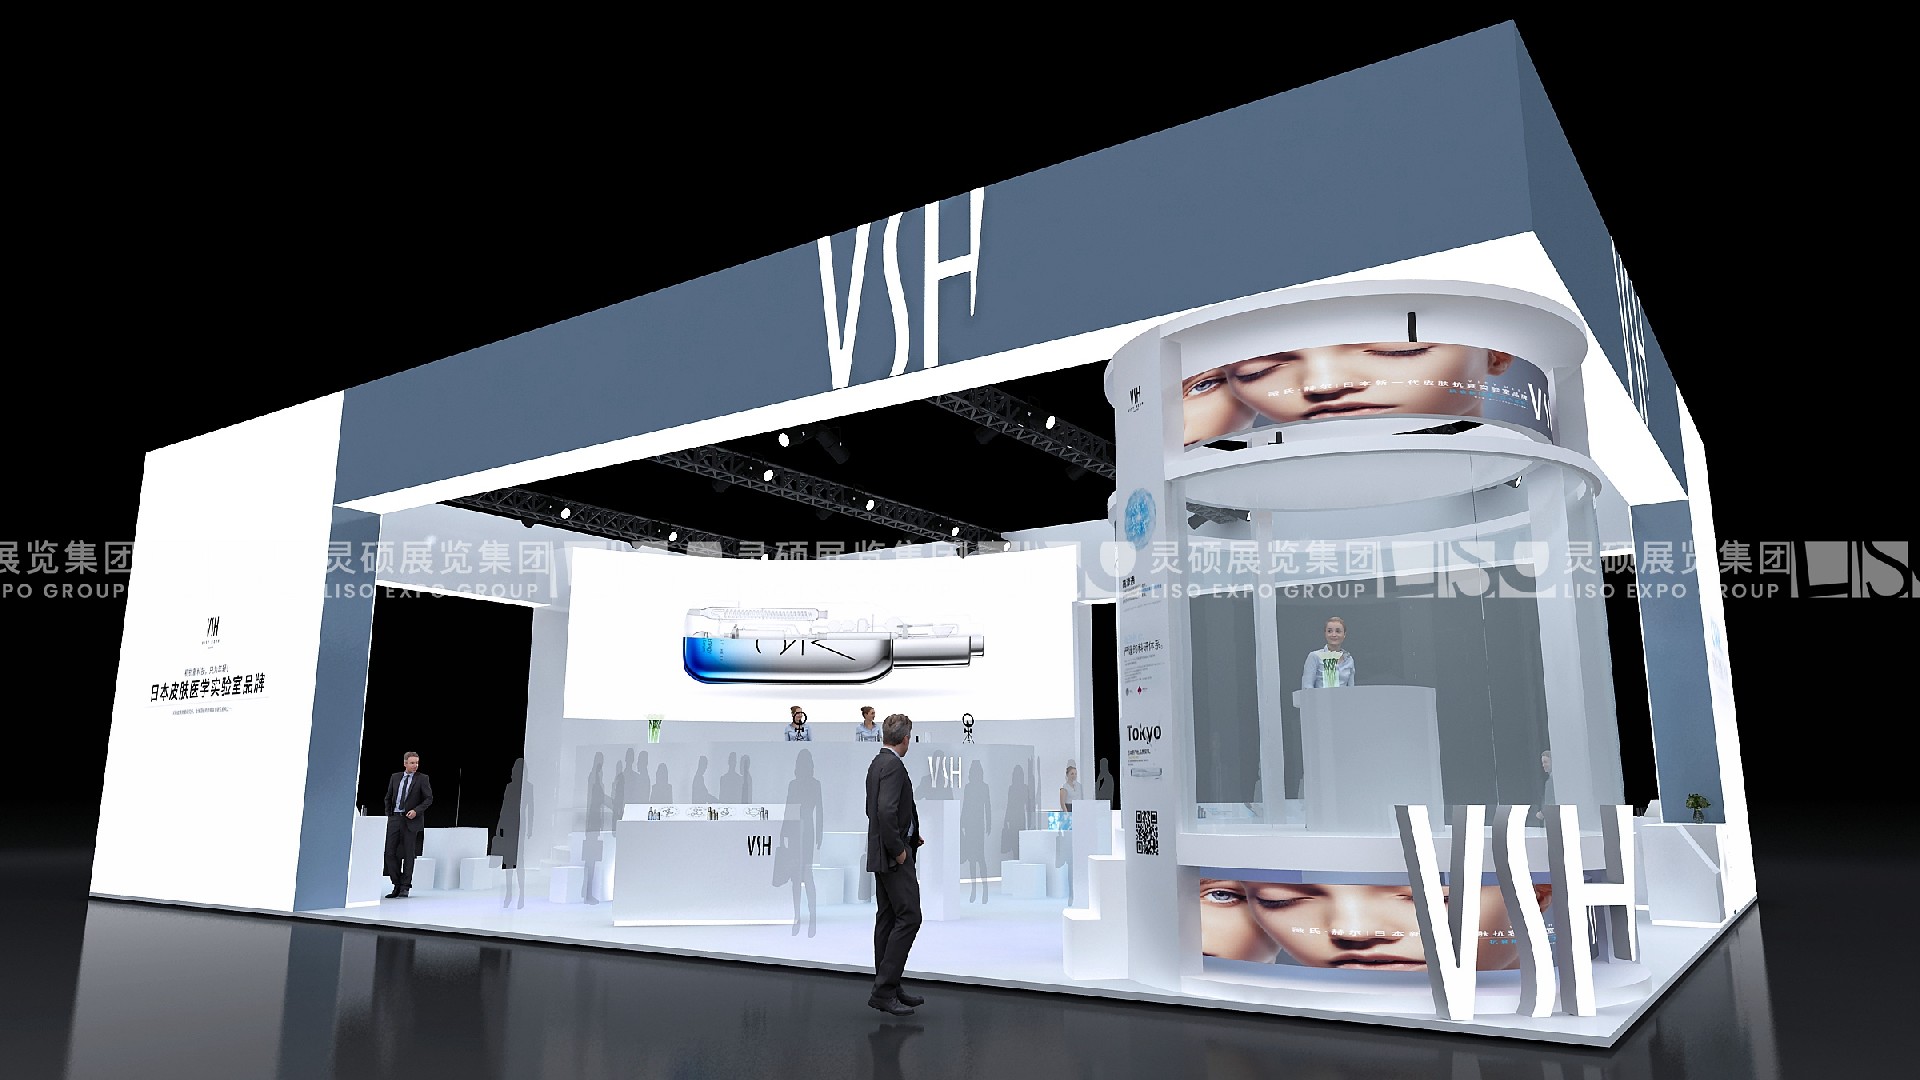 VSH-The 4th CIIE Booth Design and Construction Cas